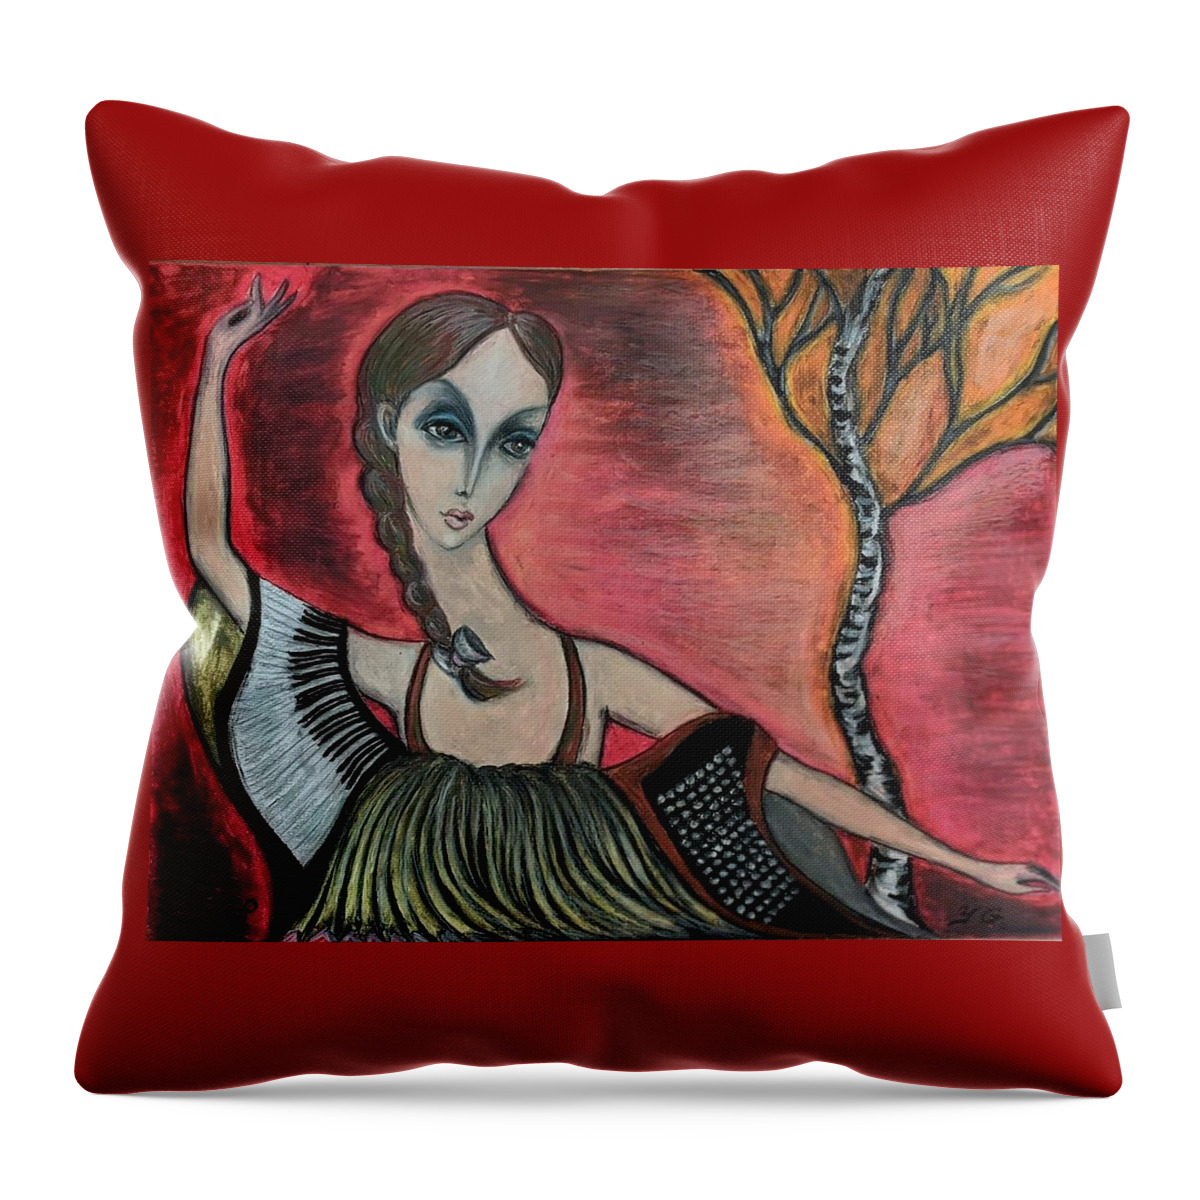 Lady Throw Pillow featuring the painting Russian Fairytale by Yana Golberg